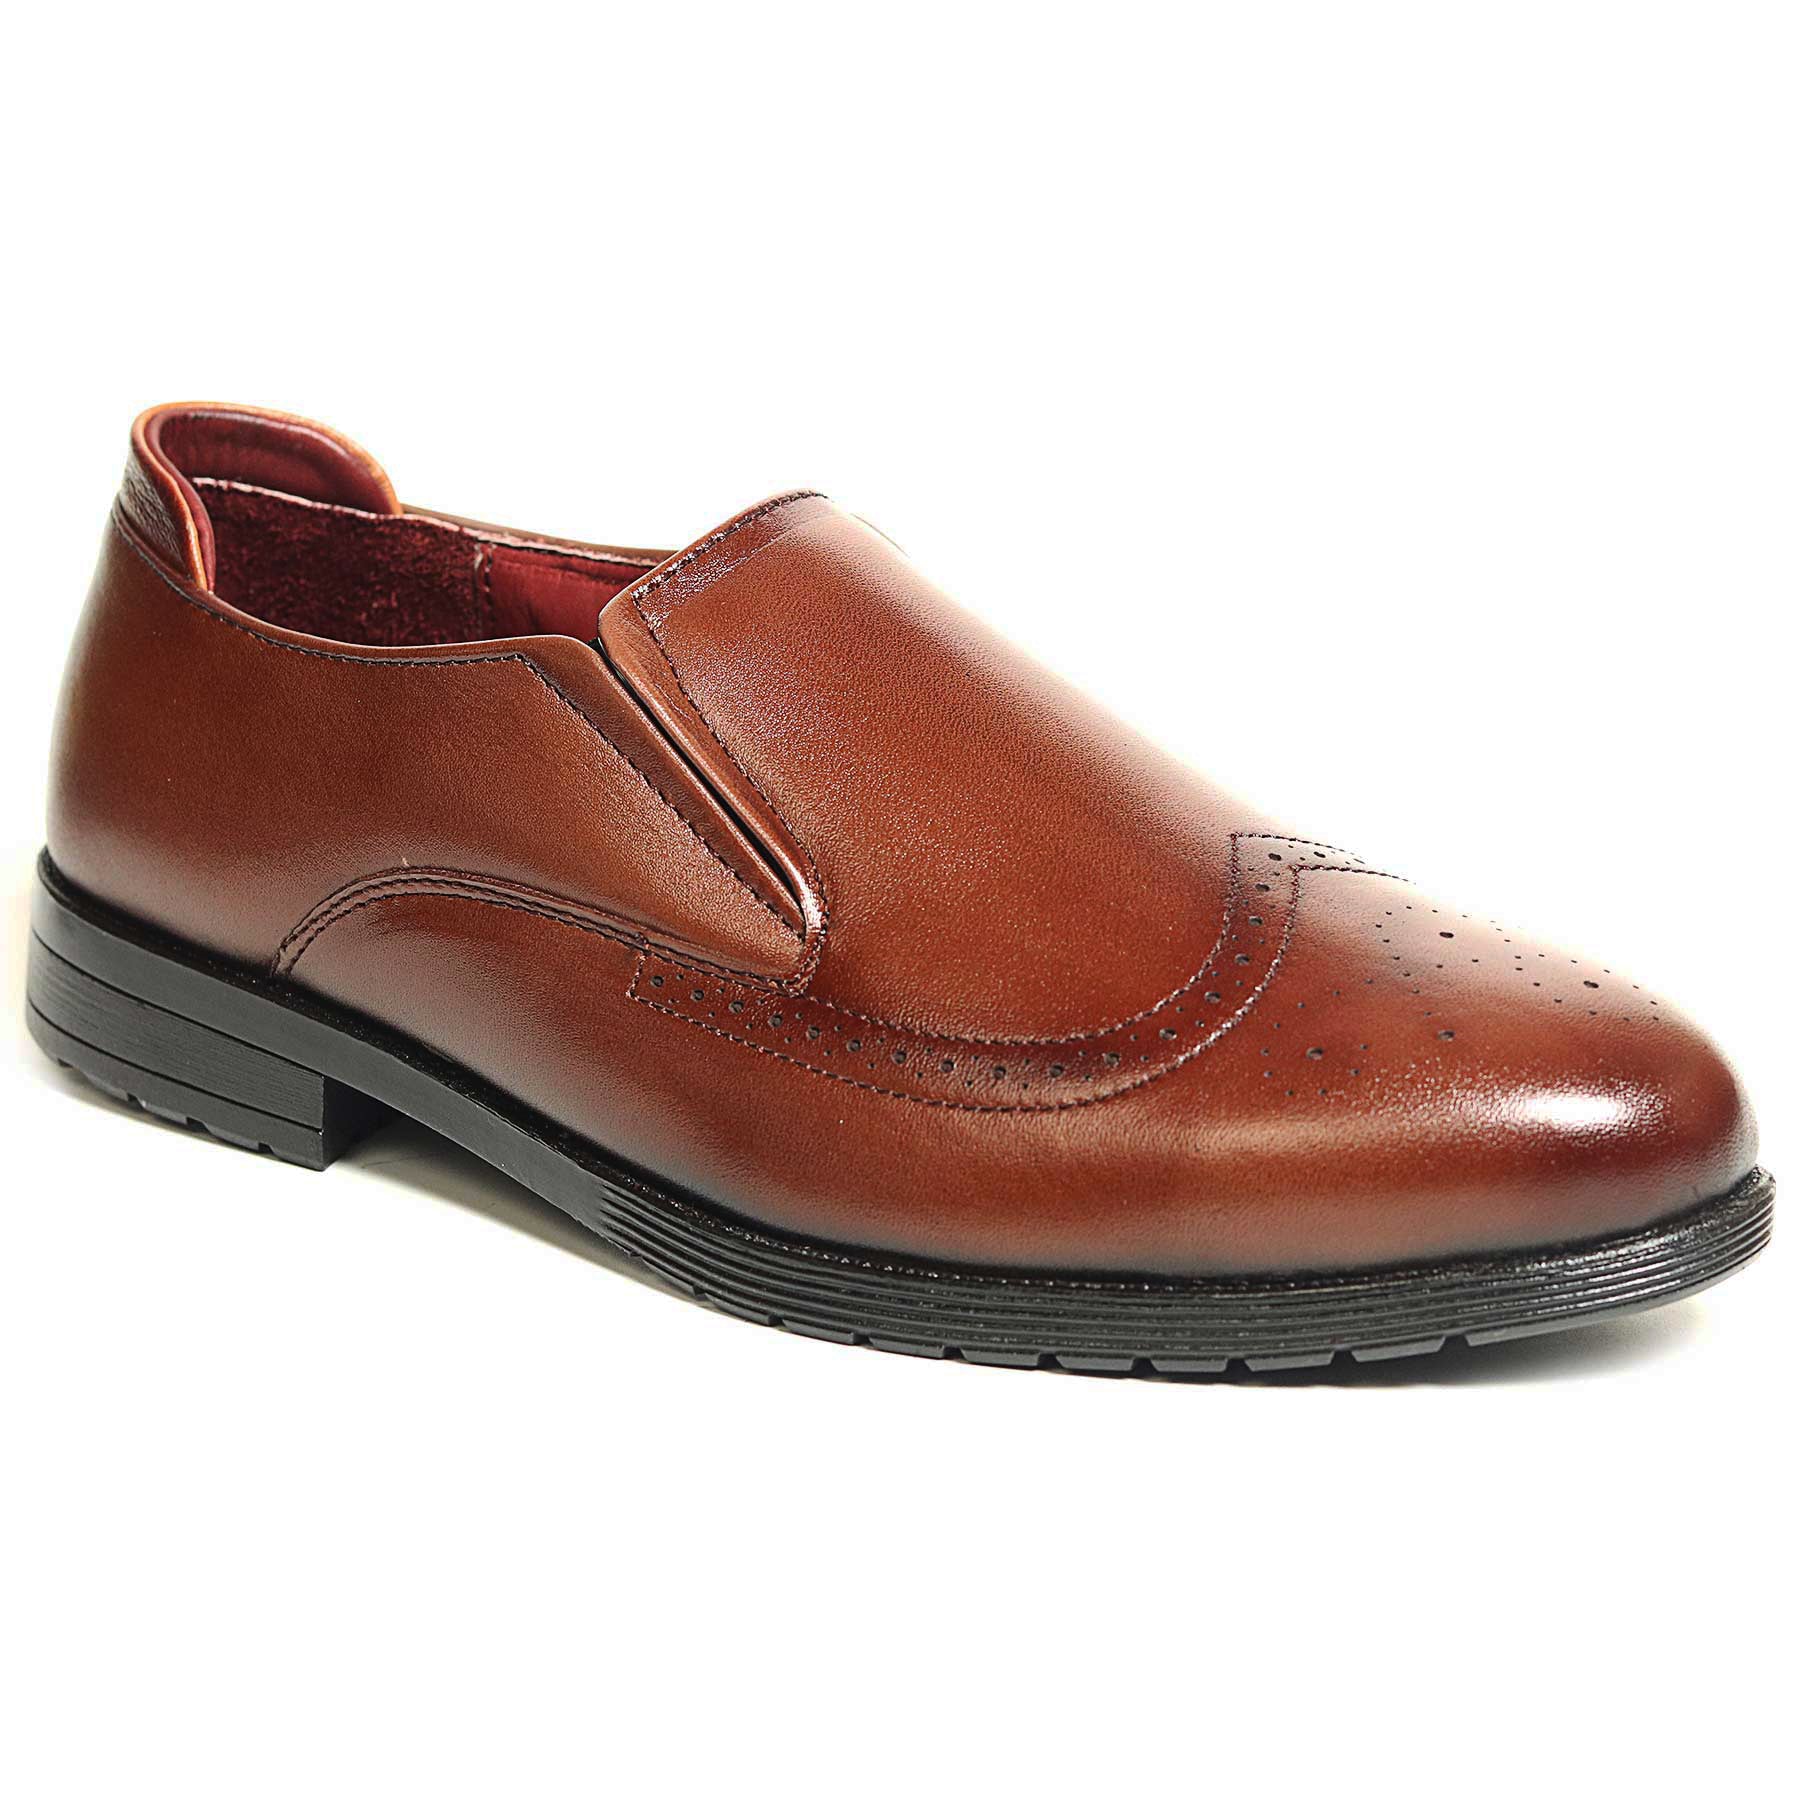 Zays Premium Leather Formal Shoe For Men (Brown) - SF97